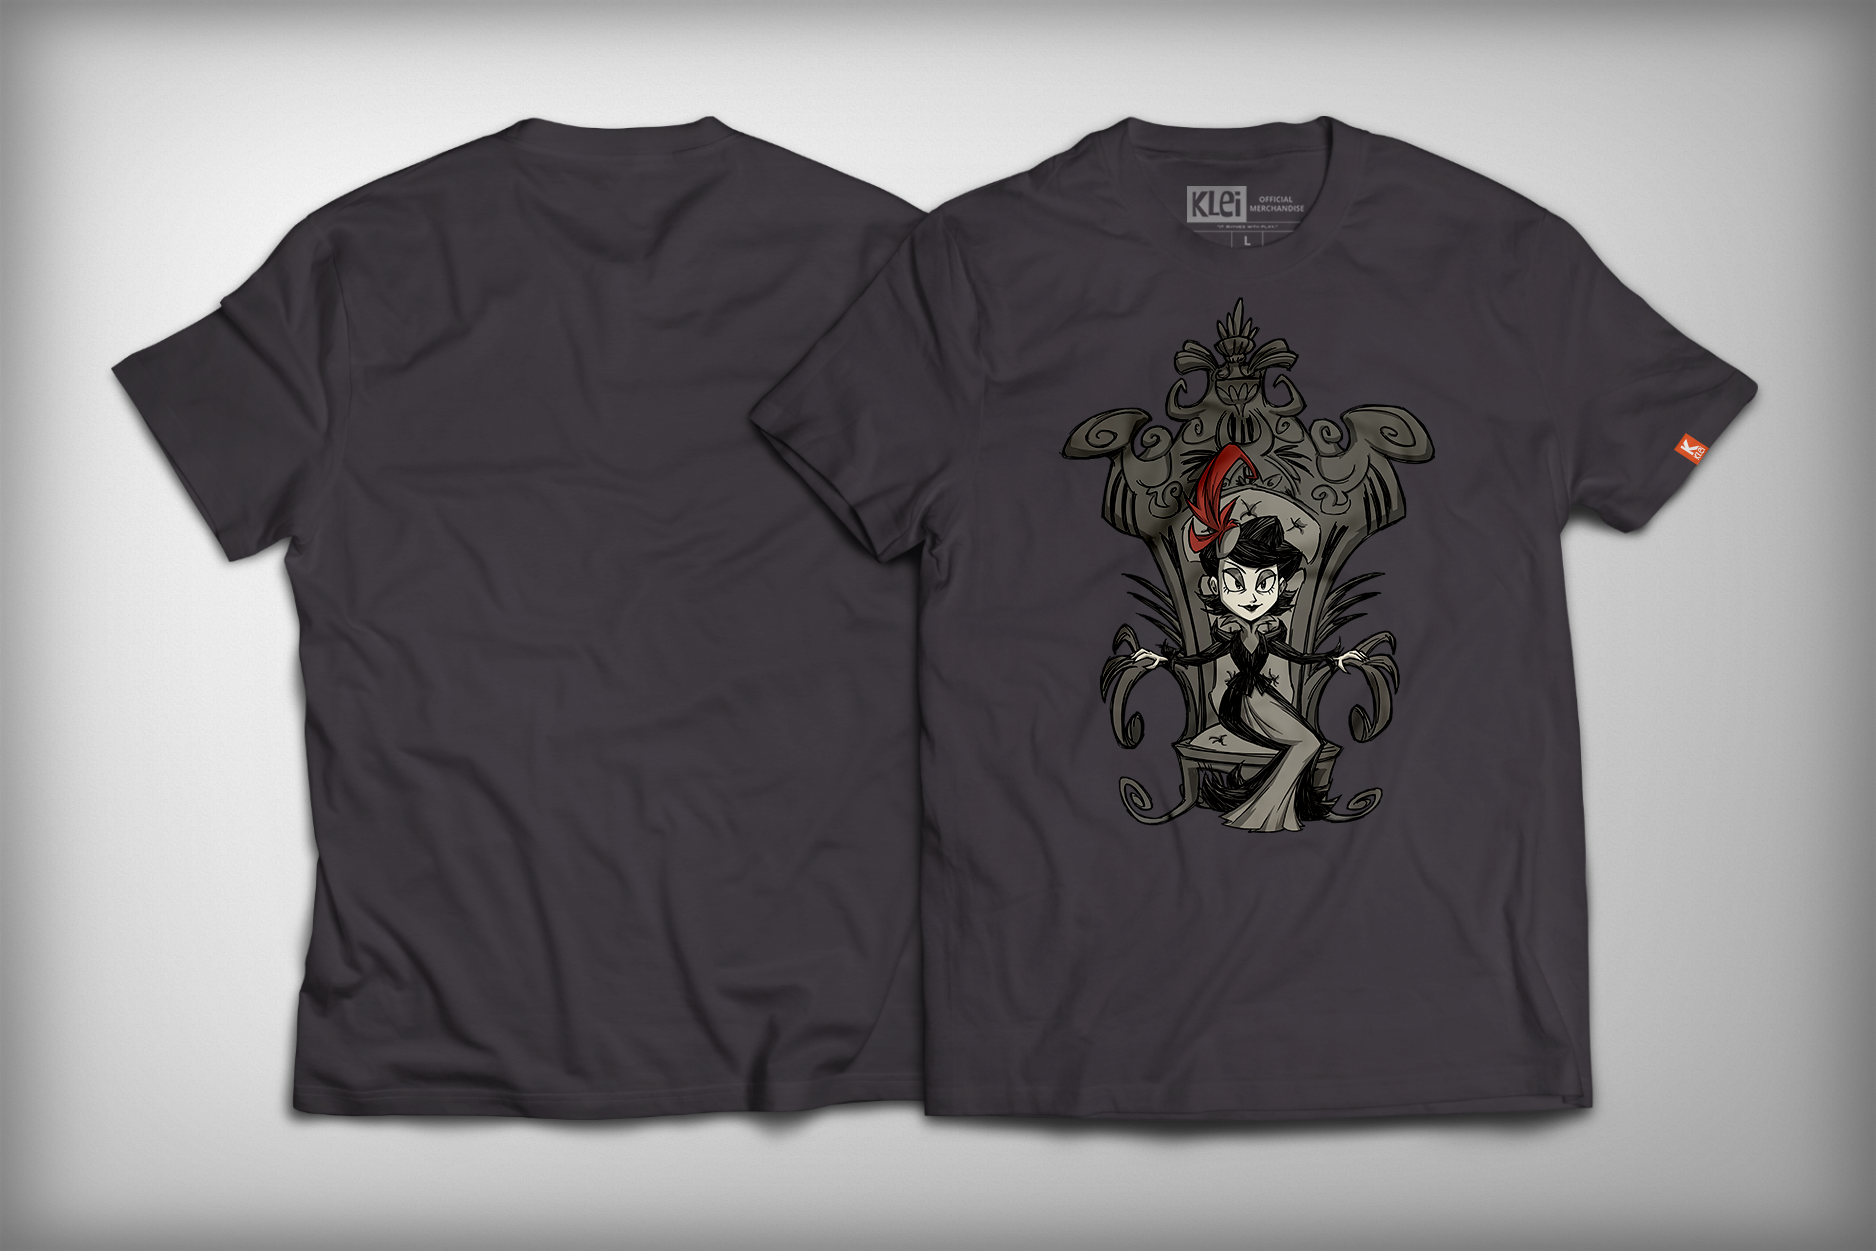 Charlie on her Throne Shirt in Graphite Black Front and Back view